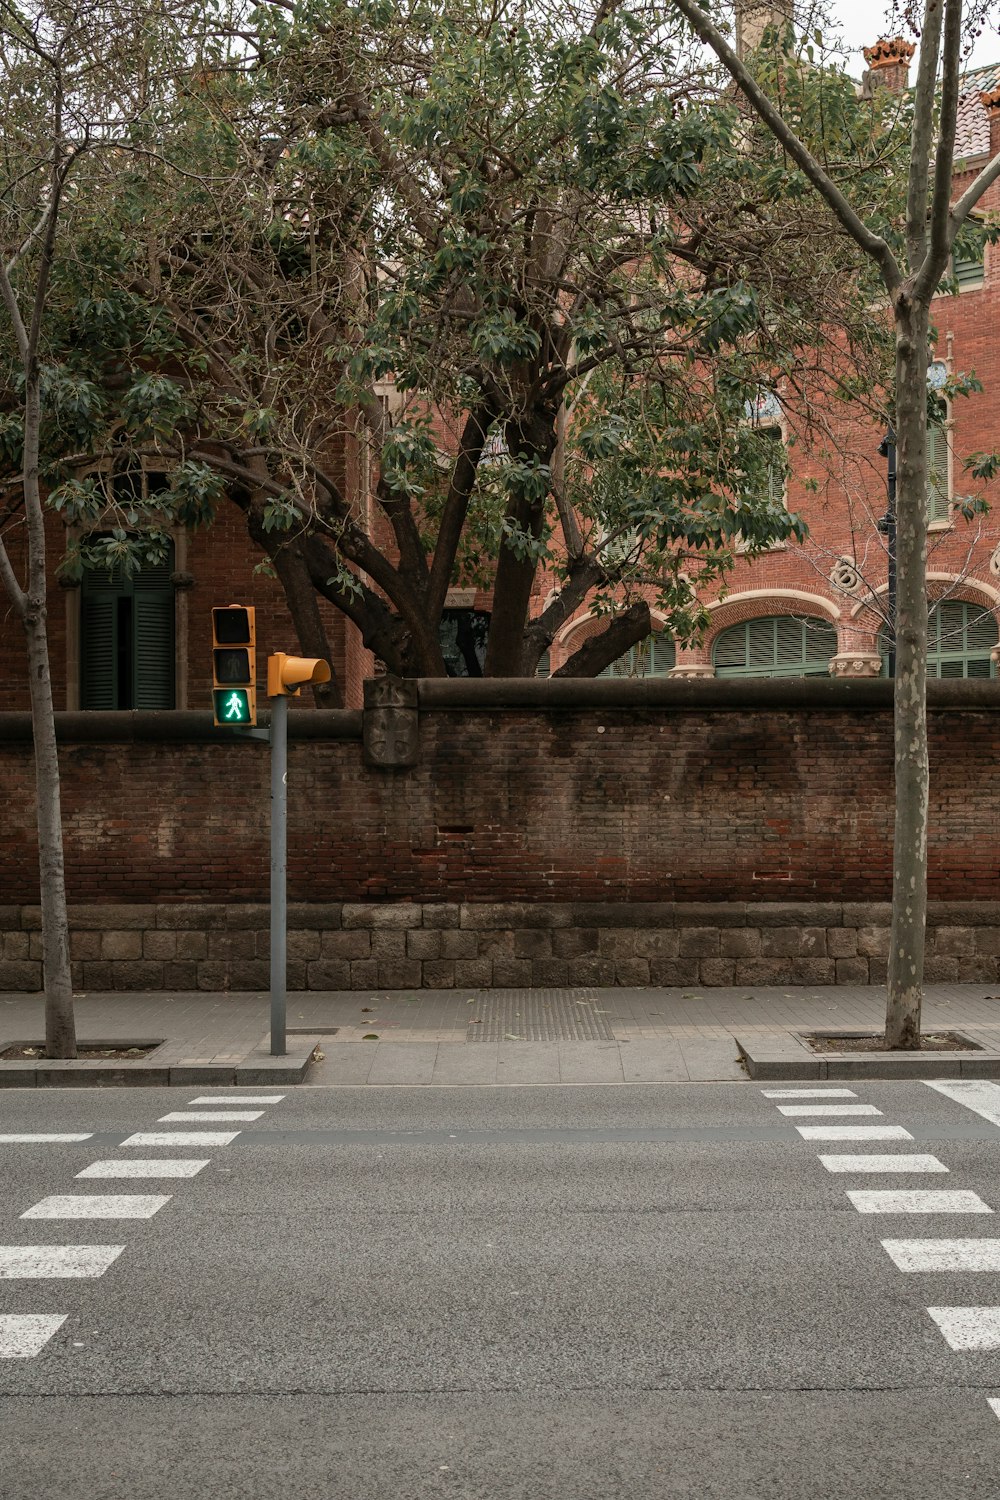 a crosswalk in front of a brick building